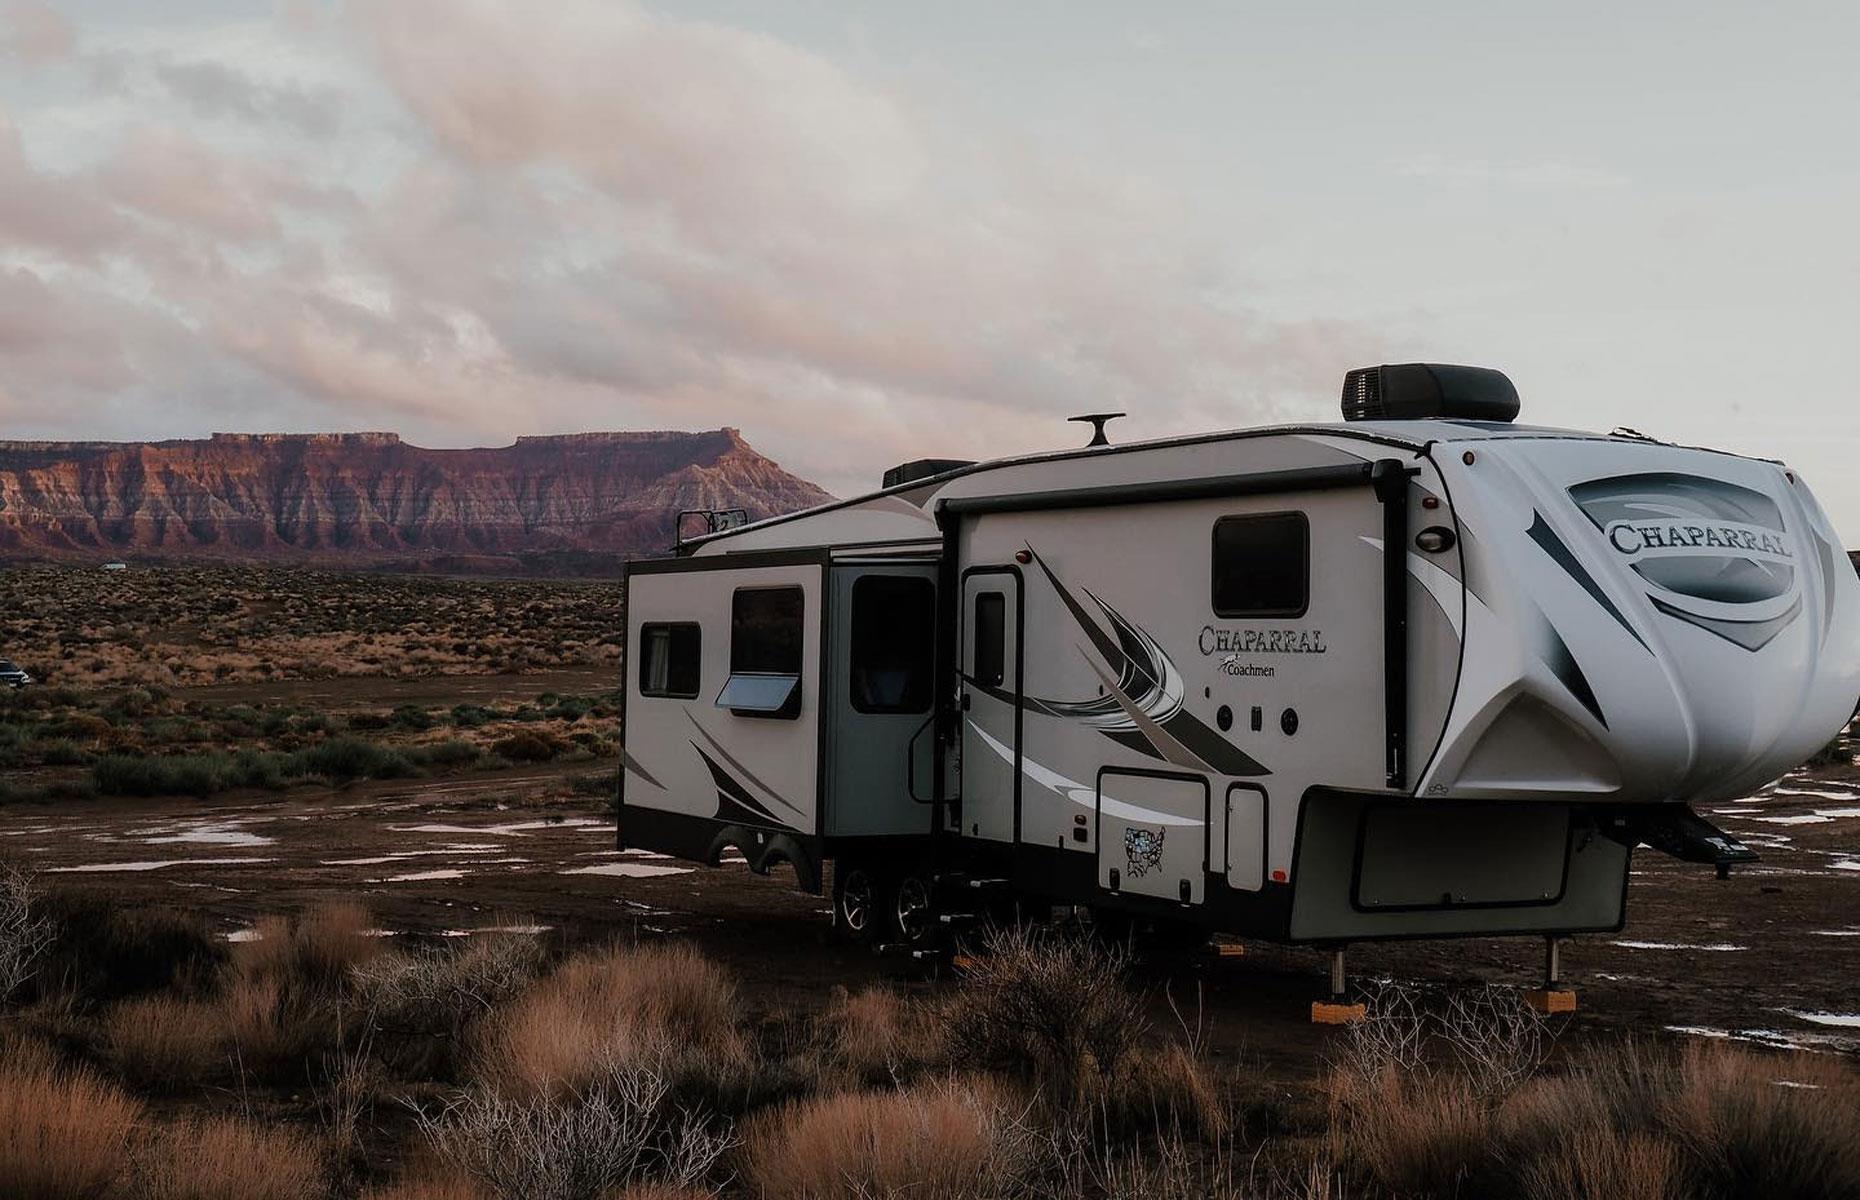 <p>Working remotely comes with some restrictions. Their equipment and communication methods need lots of power, so most weeks are spent pitched in RV parks with electricity supplies. The couple love to wild camp at weekends and enjoy heading out exploring and hiking.</p>